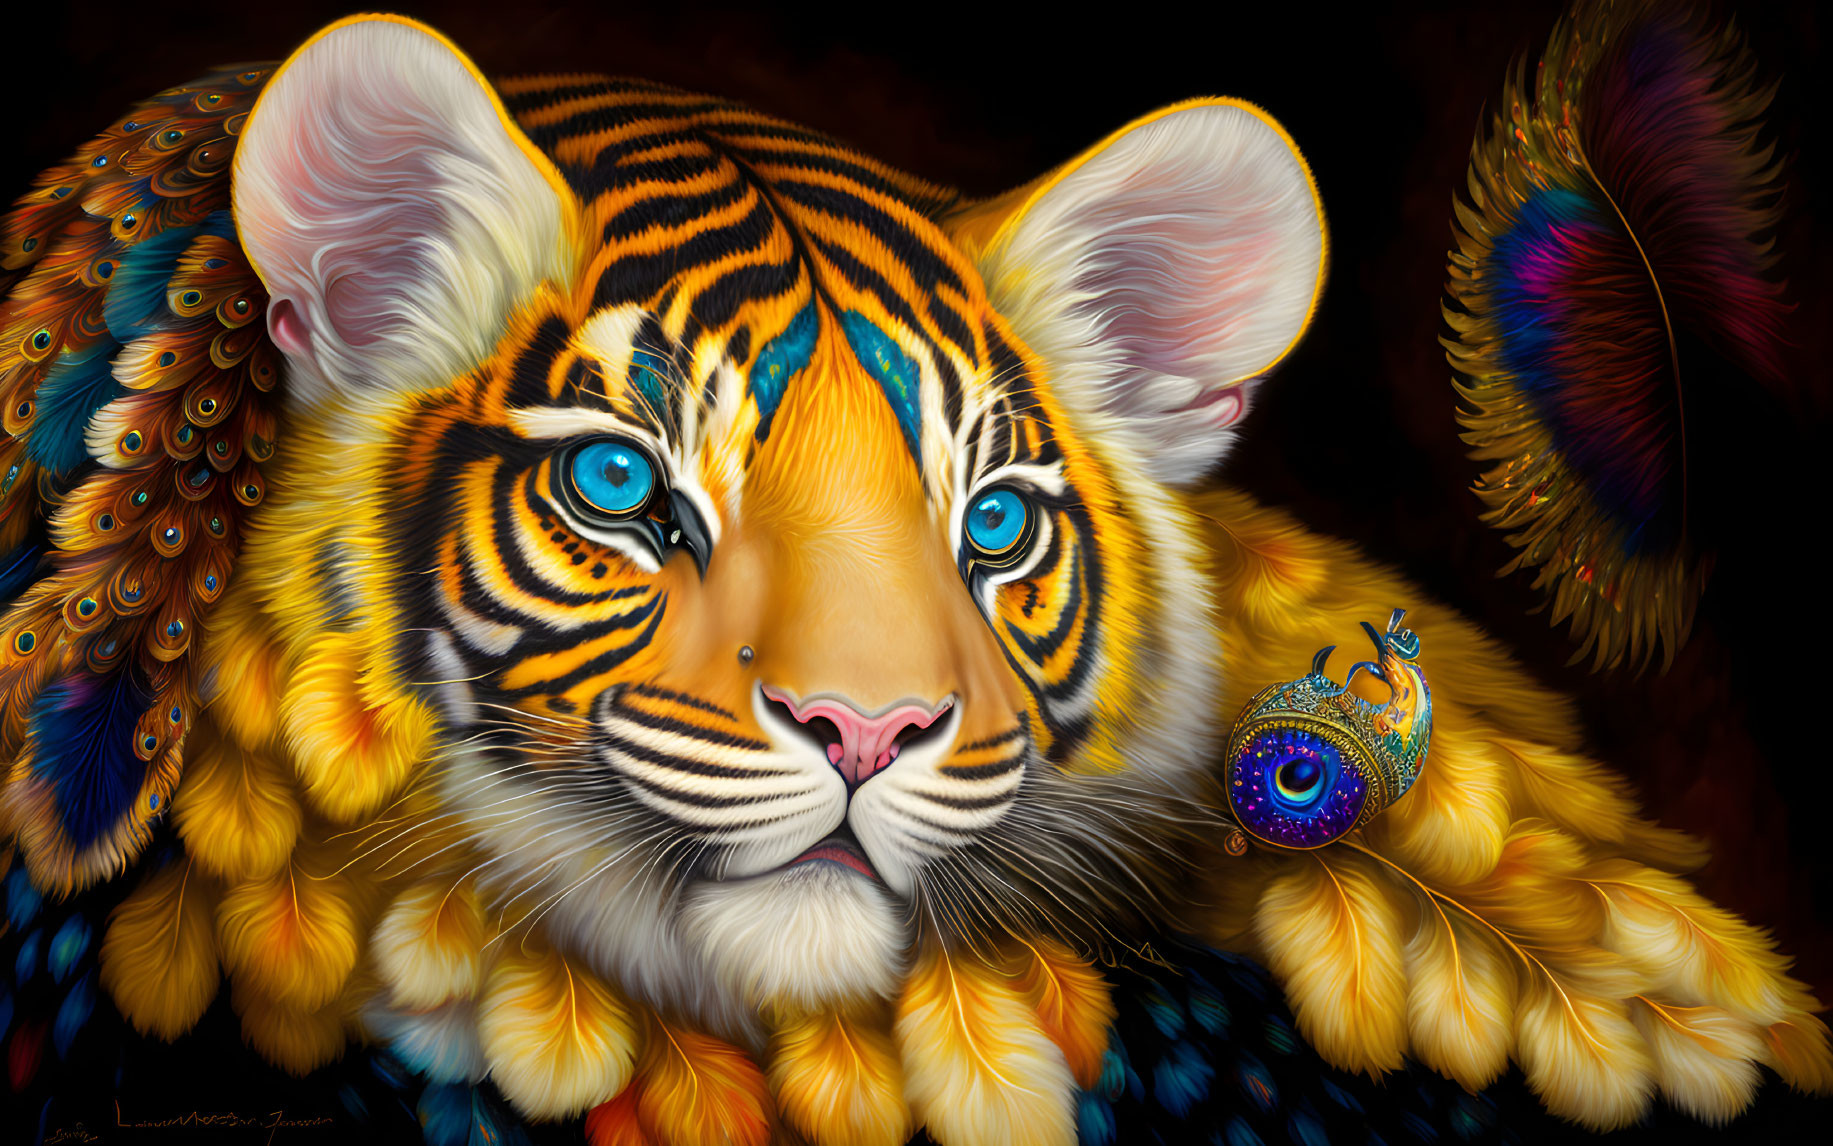 Fantasy Harlequin Tiger Cub with Peacock Feathers 